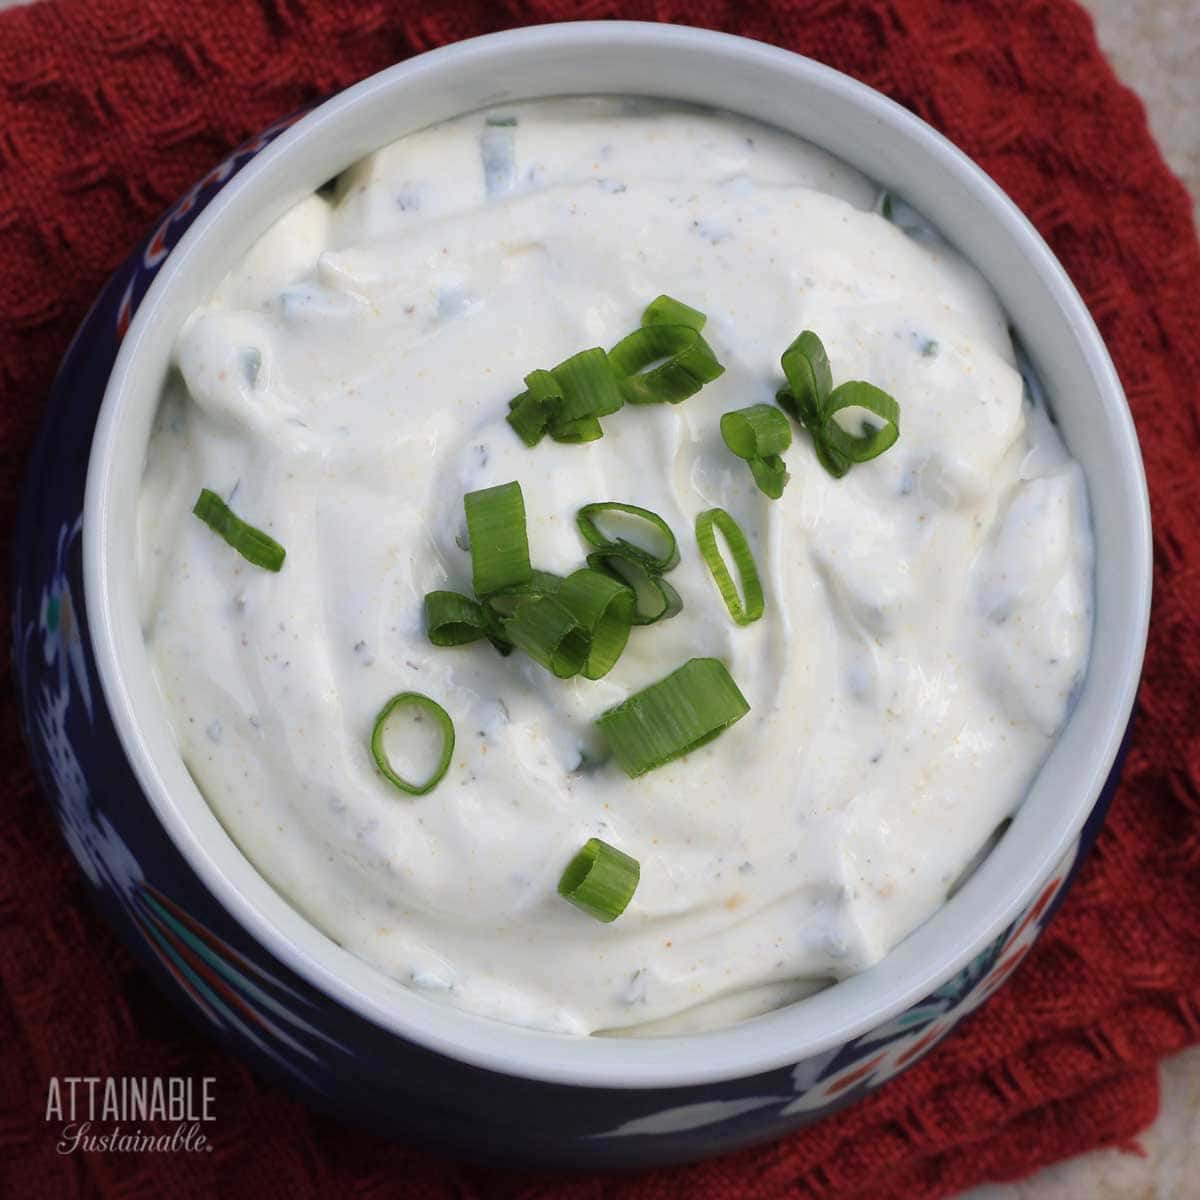 Green Onion Dip Recipe: Make it for Your Bash